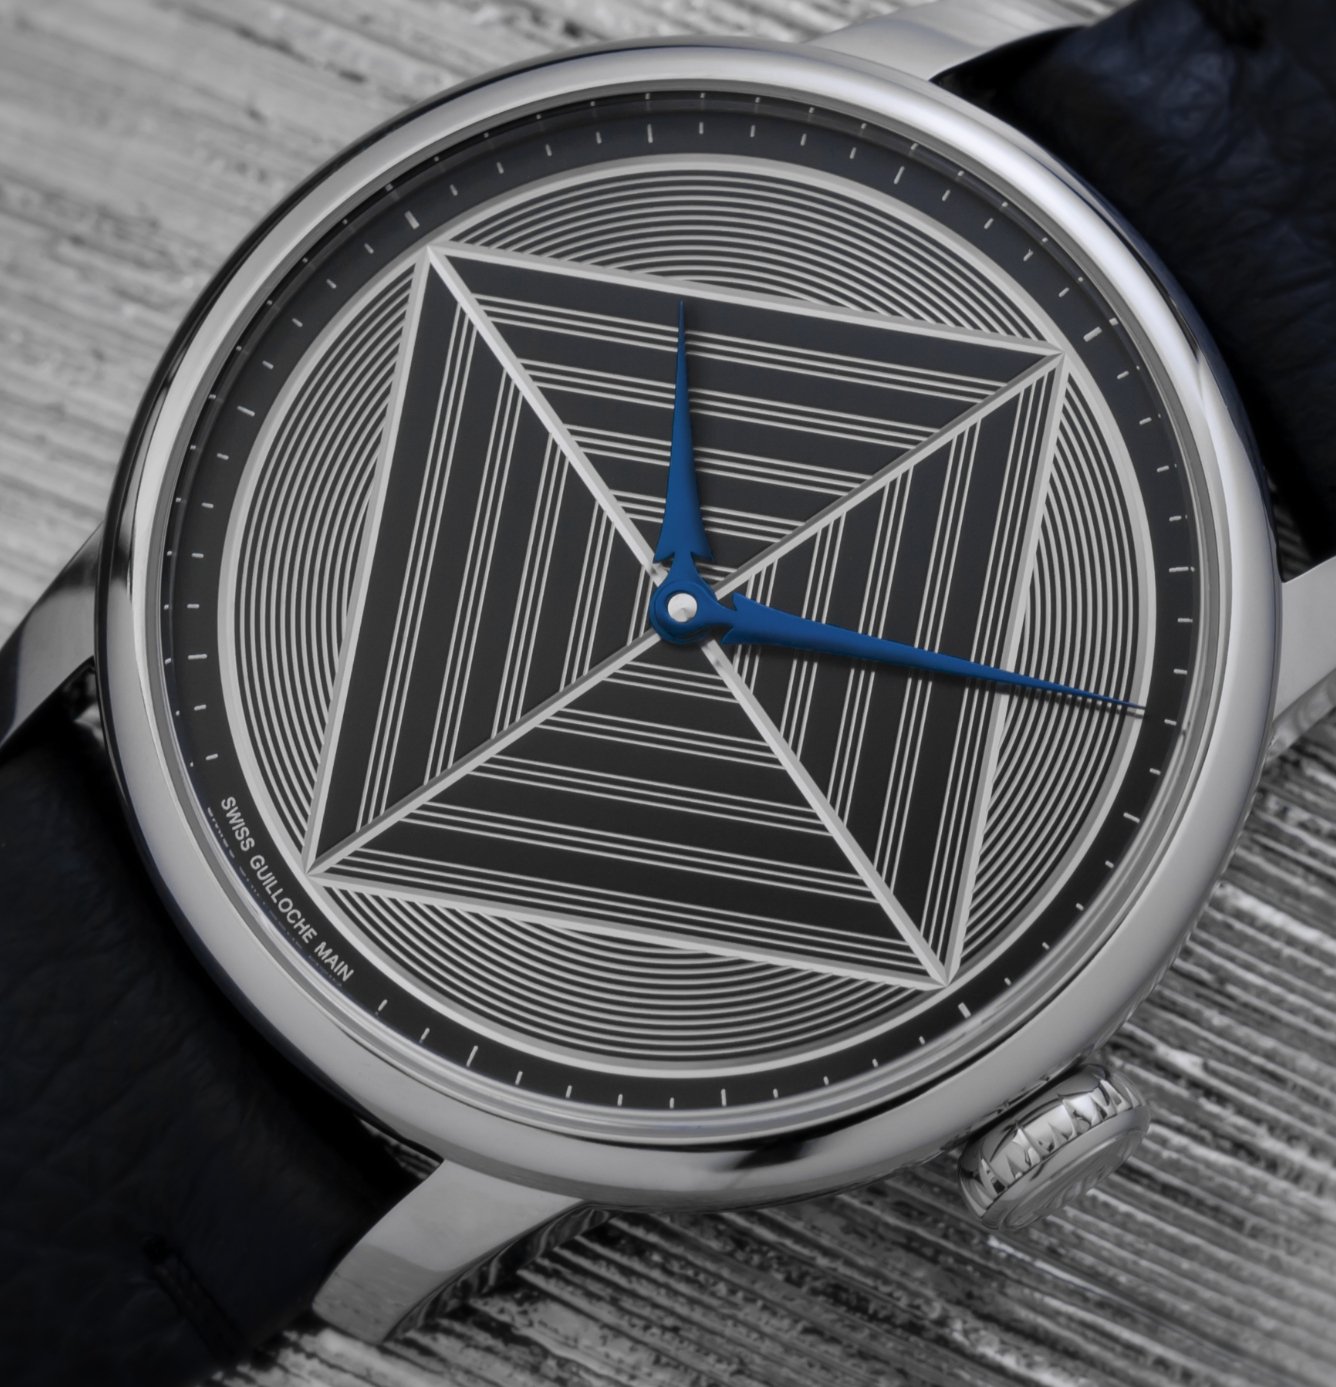 An introduction to Louis Erard's Excellence Guilloché Main II 